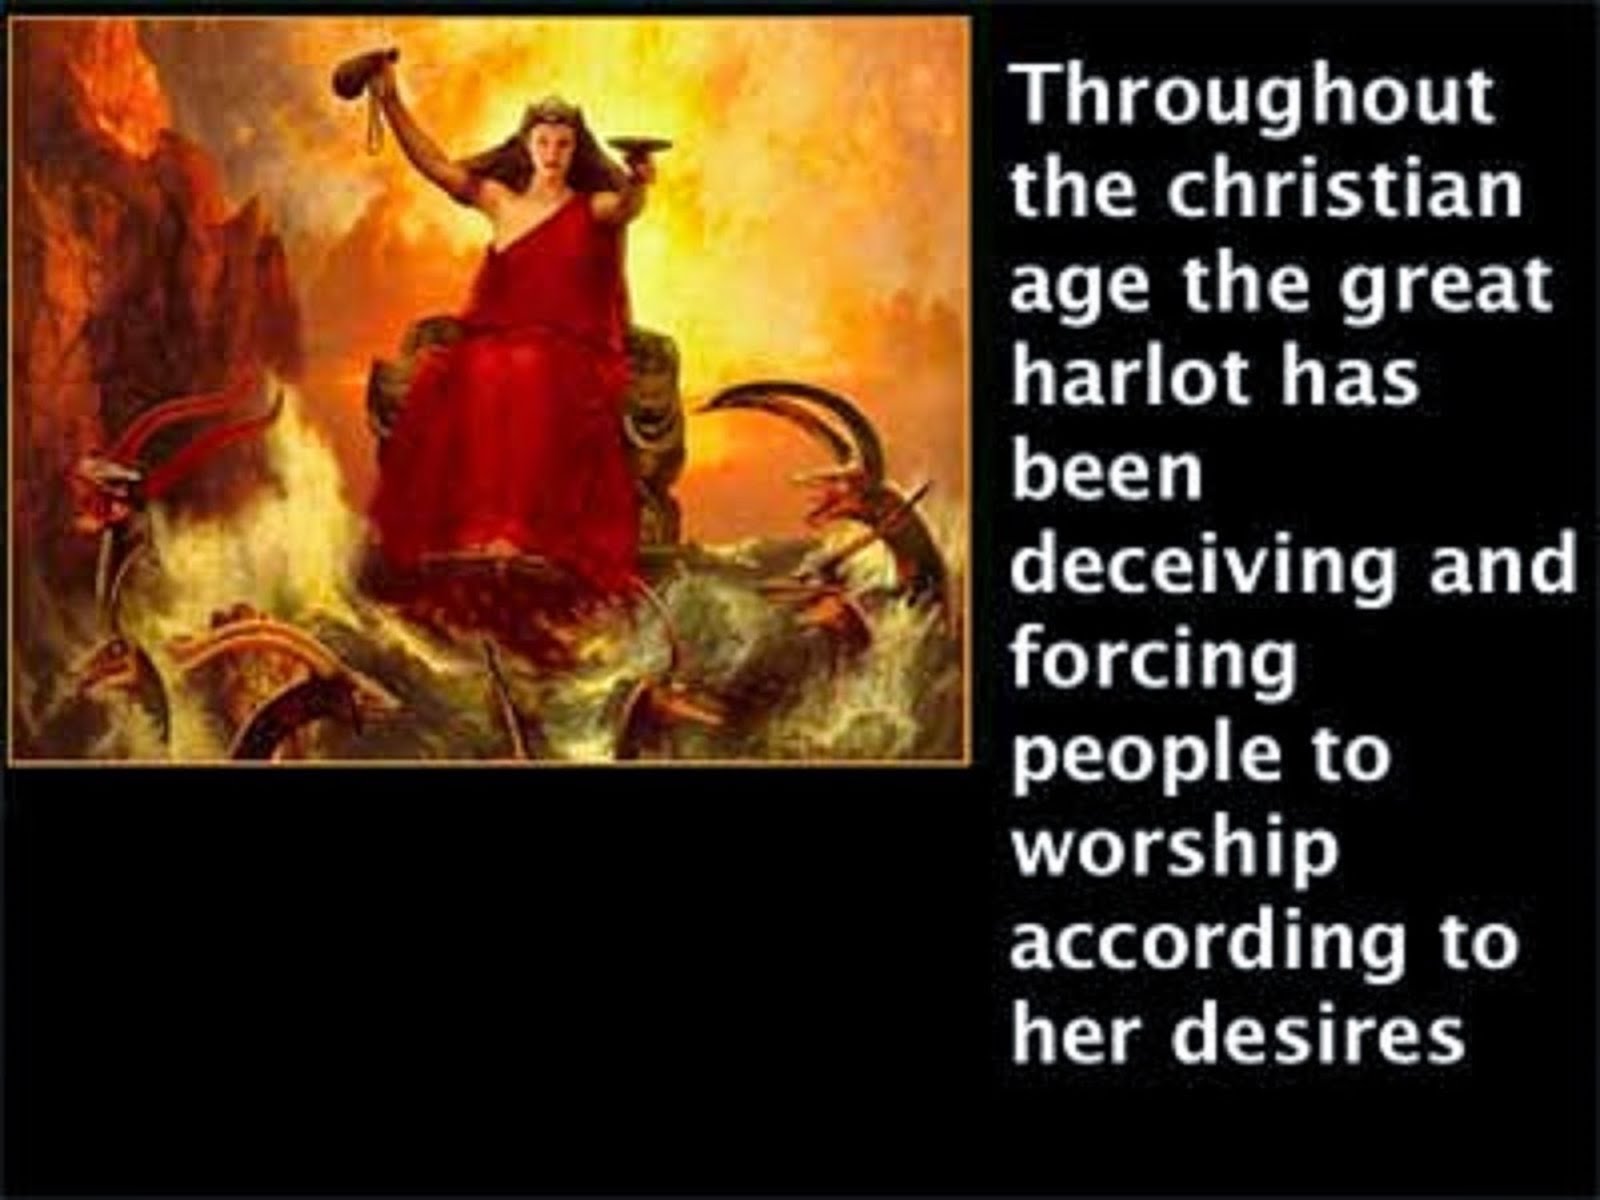 THE GREAT HARLOT HAS BEEN FORCING OTHER CHURCHES TO WORSHIP ACCORDING TO HER WILL FOR CENTURIES